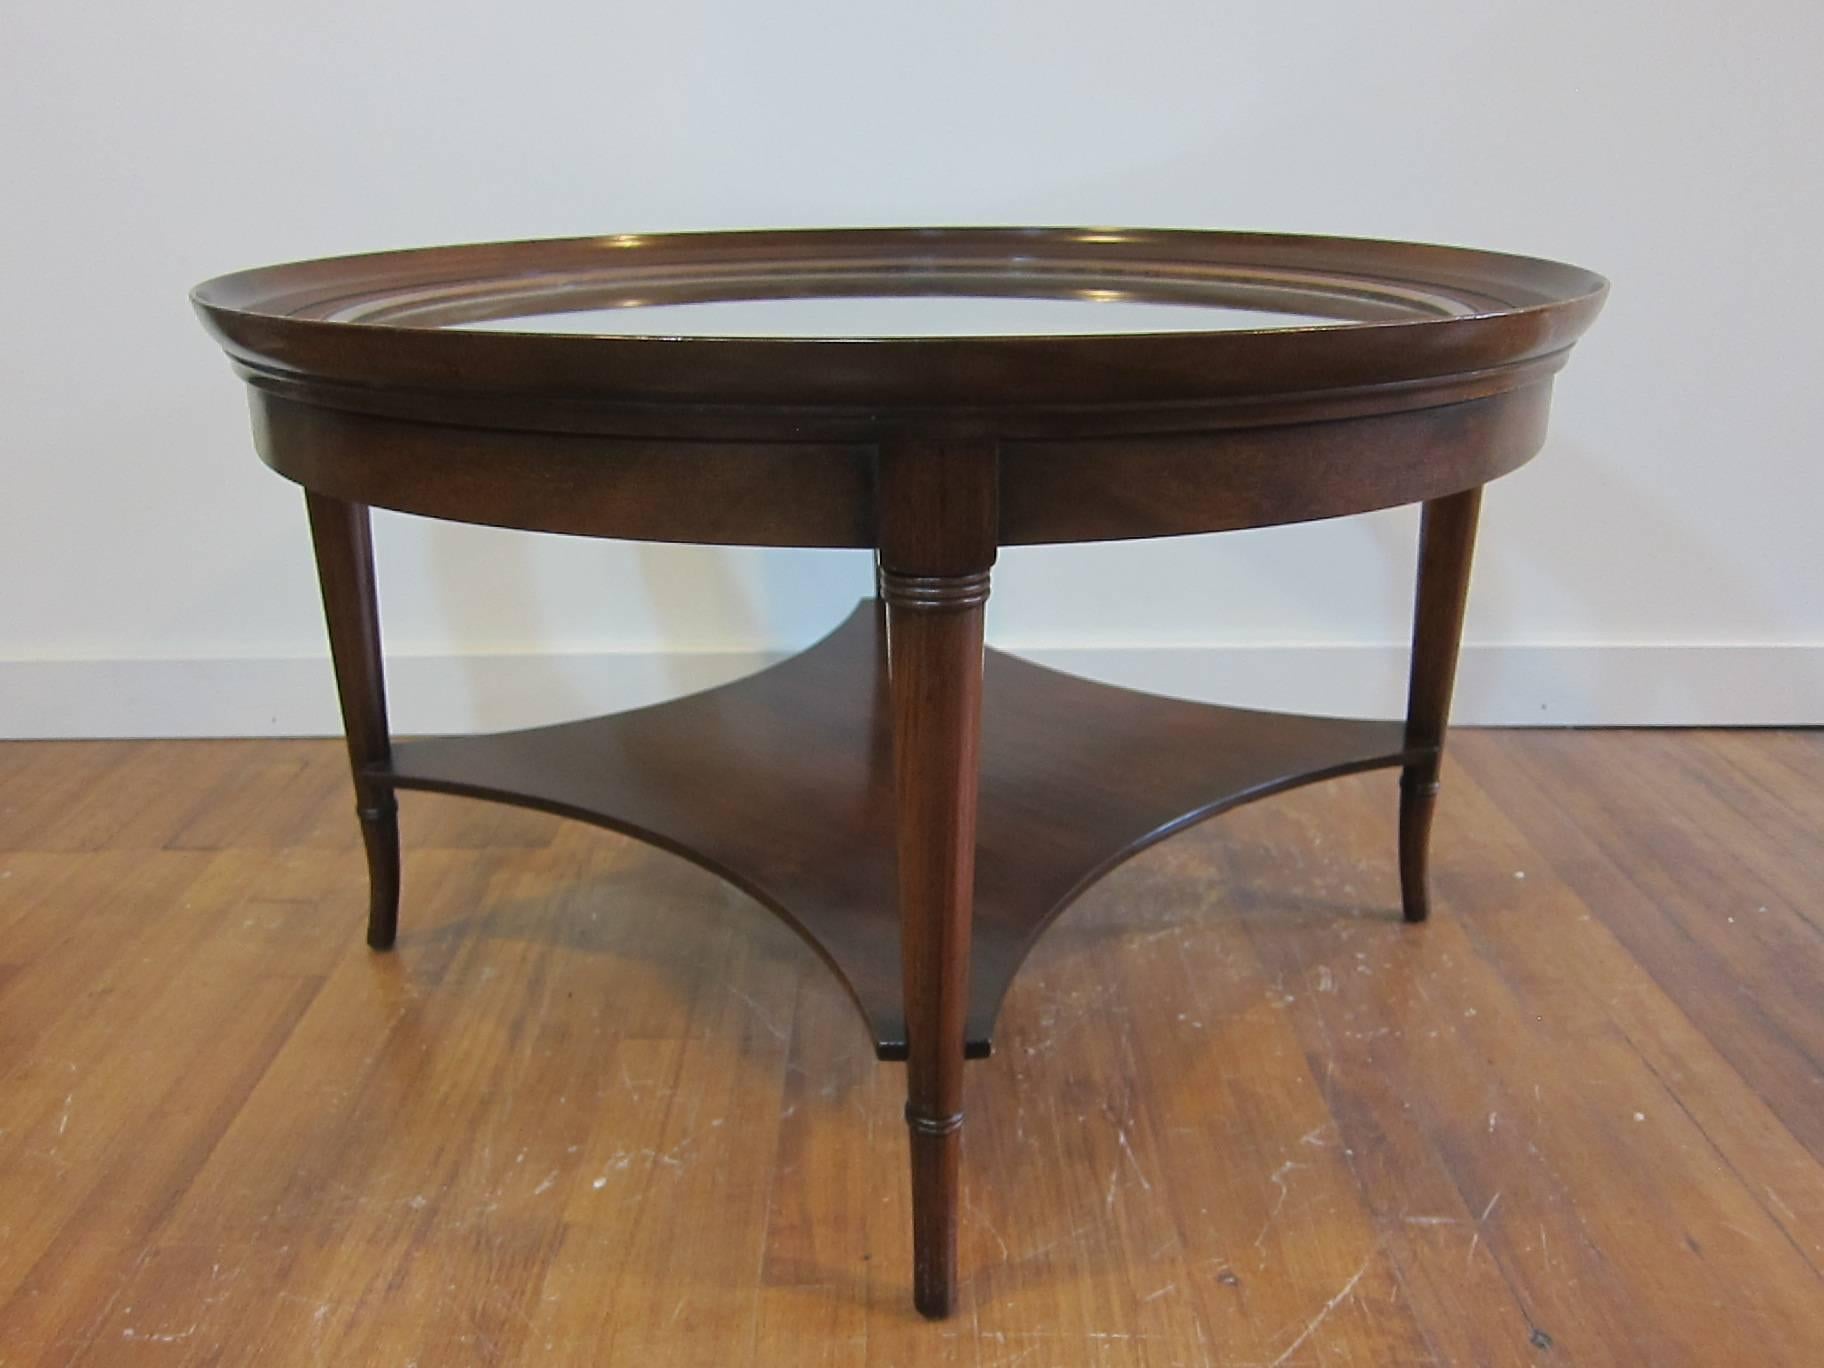 1950, saber leg round glass top cocktail table in walnut by Kittinger. Elegant cocktail table with neoclassical style in very good condition. Glass has scratches consistent with age and use. For an additional $225.00 we will replace with new